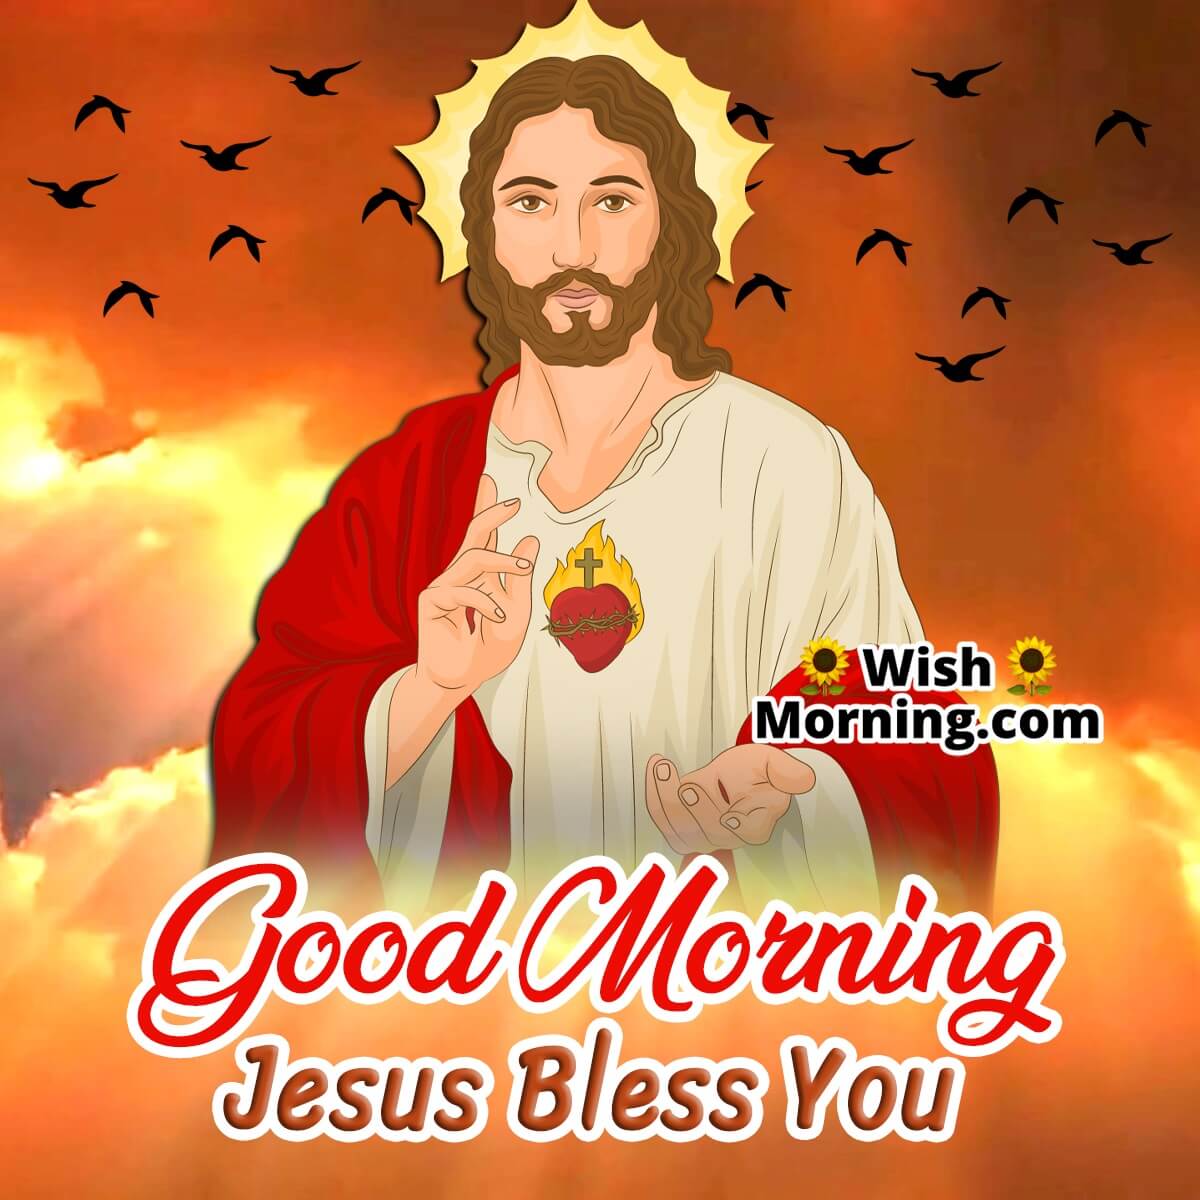 Over 999+ Stunning Good Morning Jesus Images - Impeccable Assortment of ...